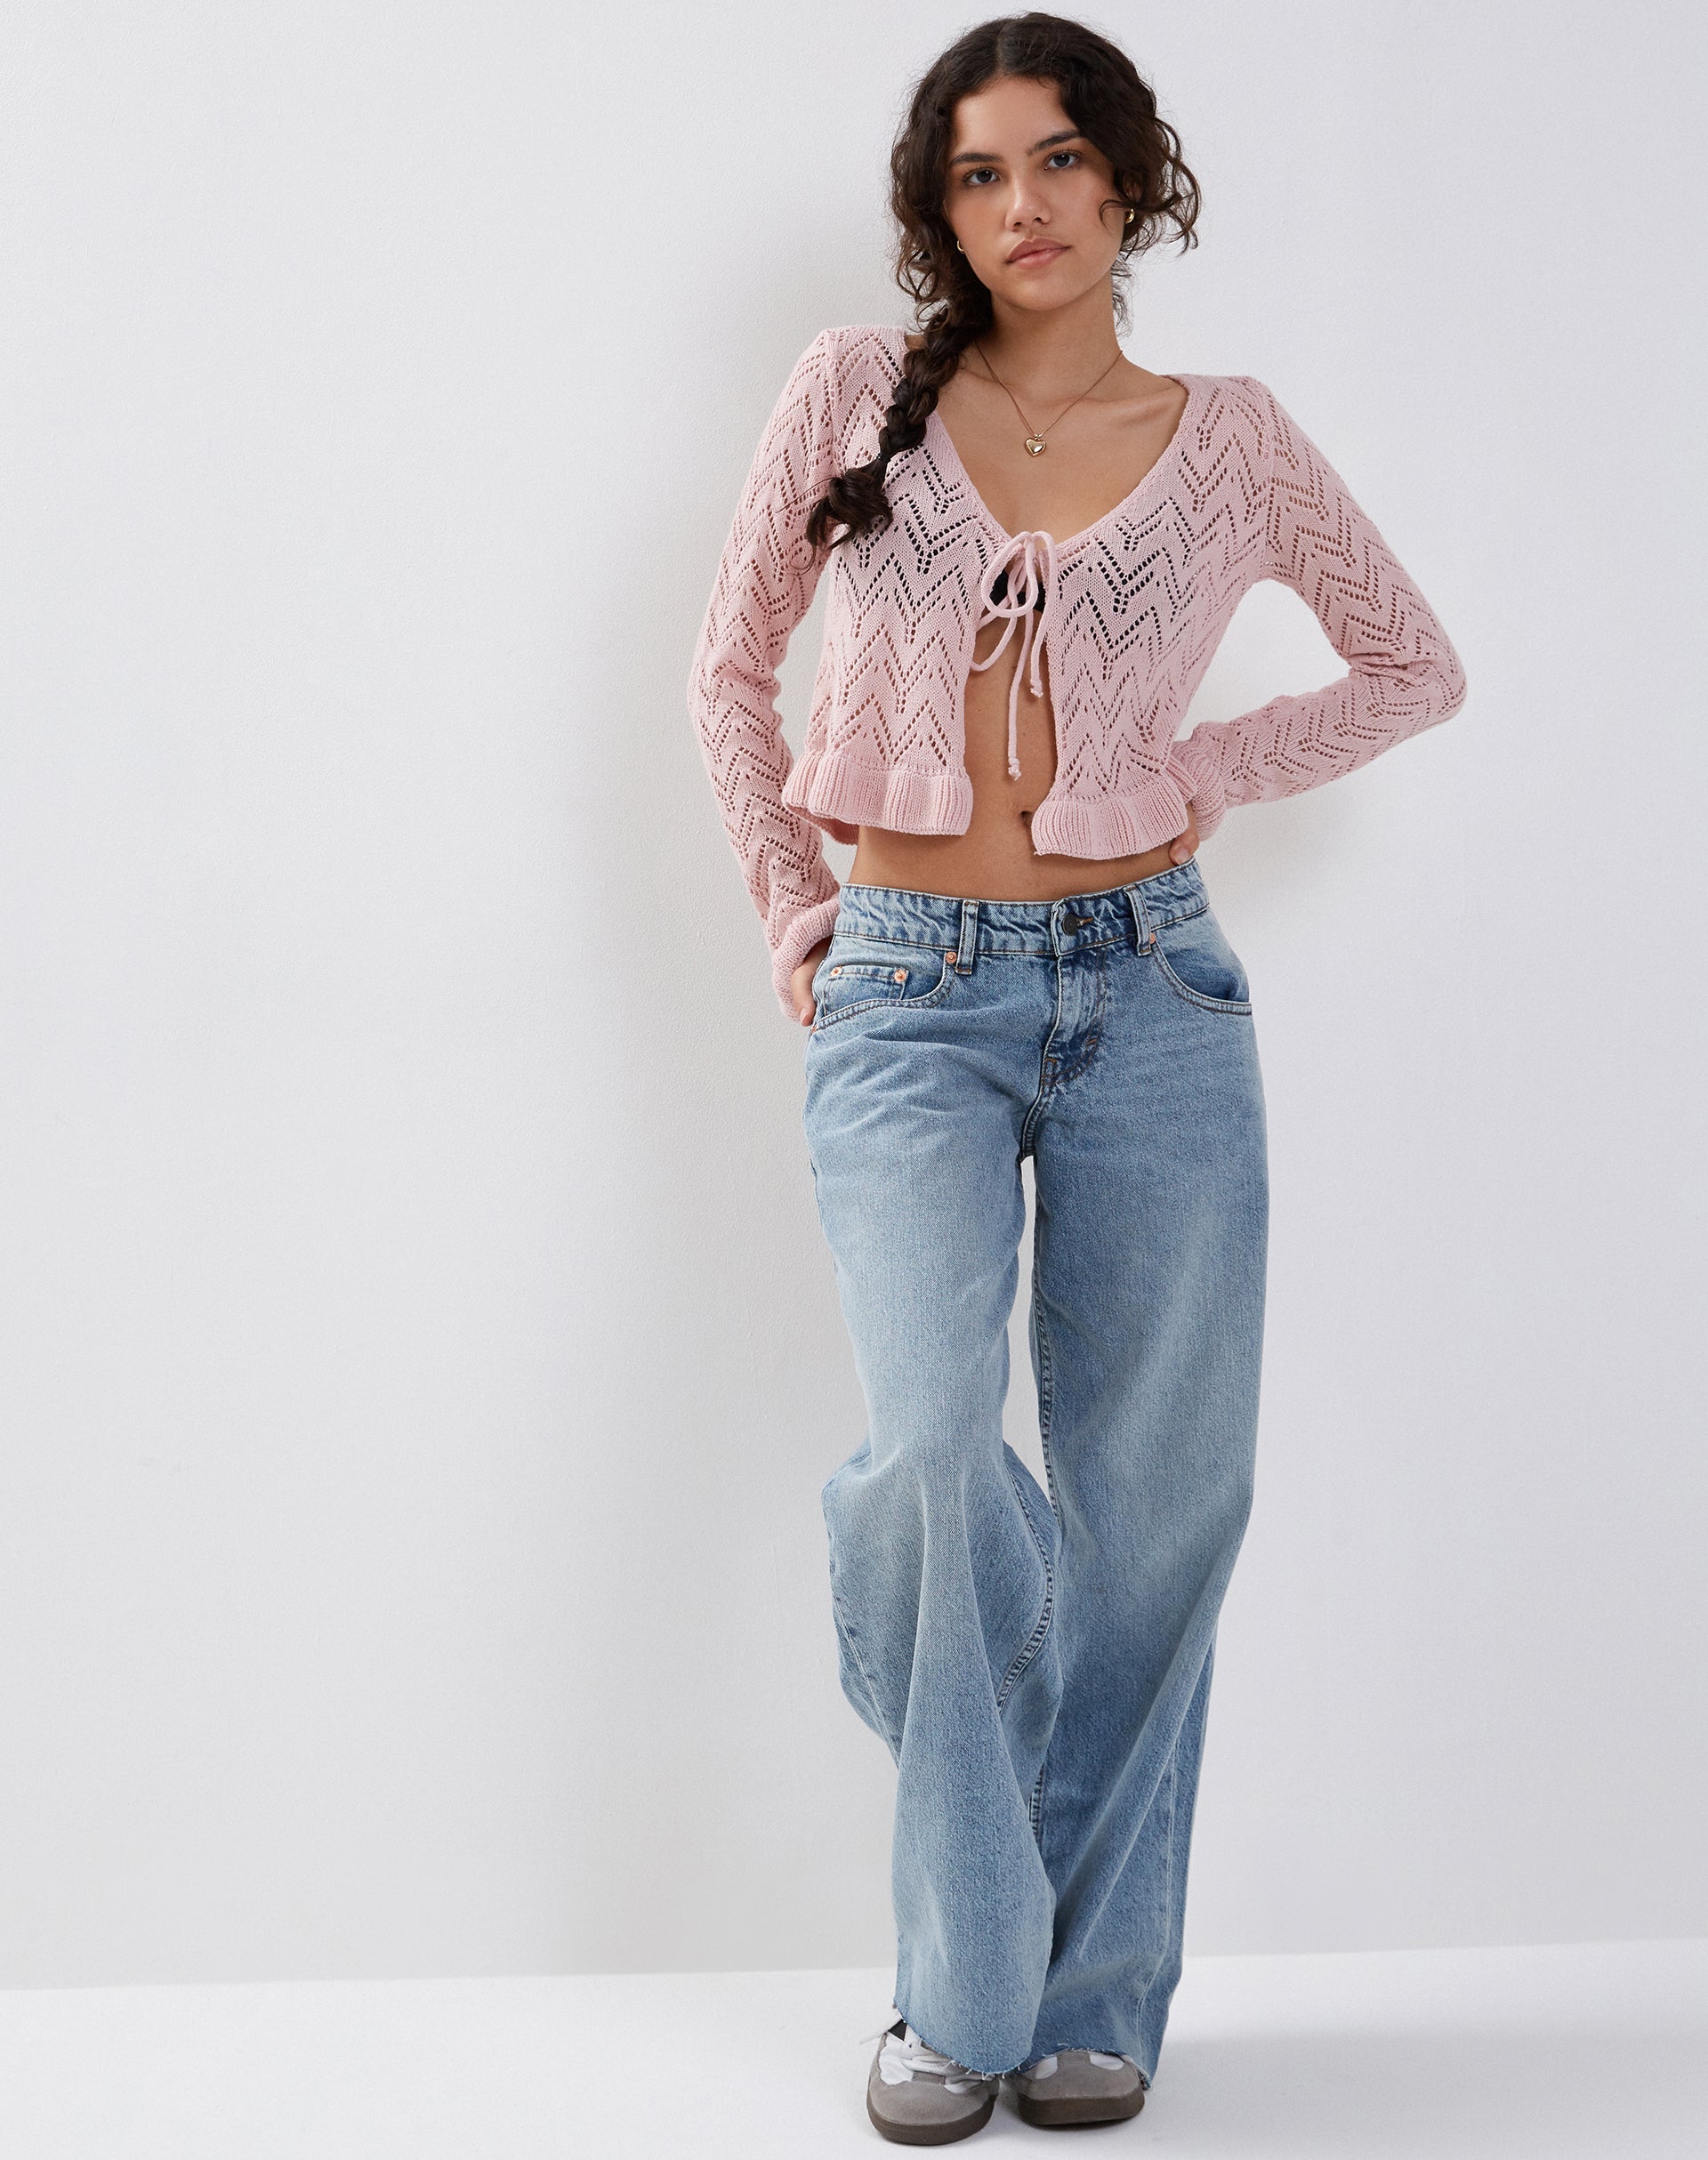 Image of Vella Cardigan in Knitted Pink